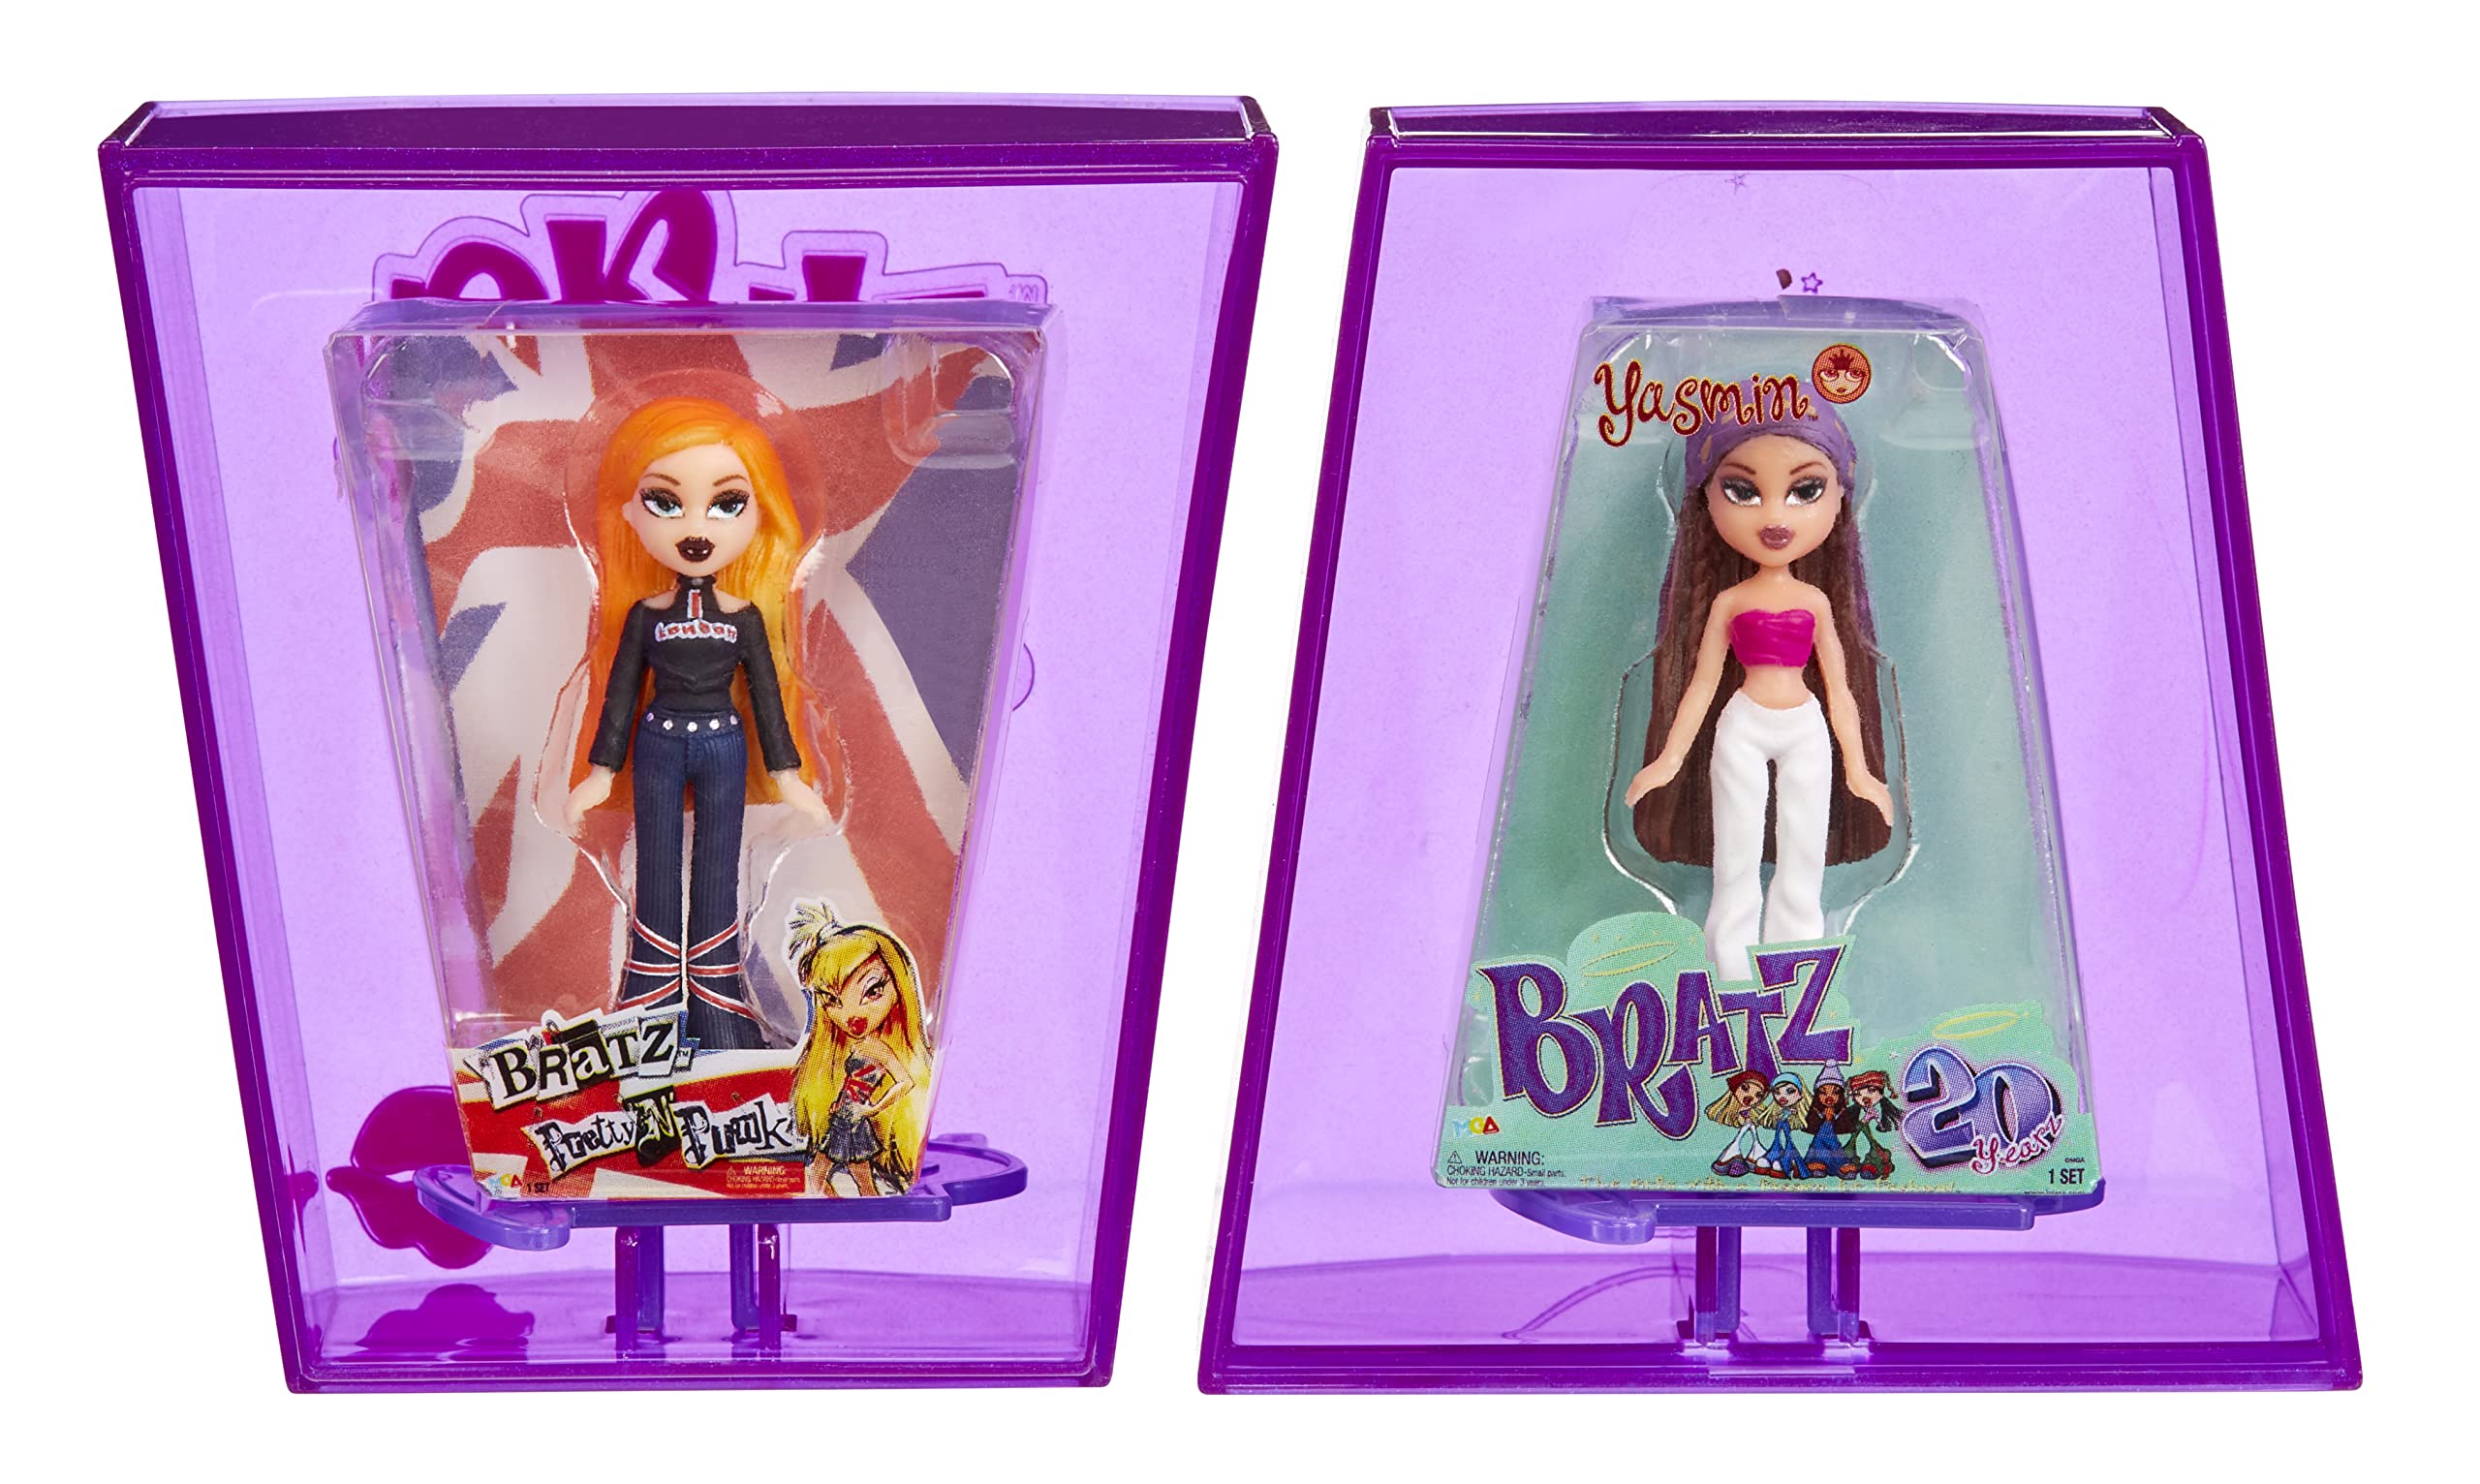 MGA's Miniverse Bratz Minis - 2 Bratz Minis in Each Pack, Blind Packaging Doubles as Display, Y2K Nostalgia, Collectors Ages 6 7 8 9 10+